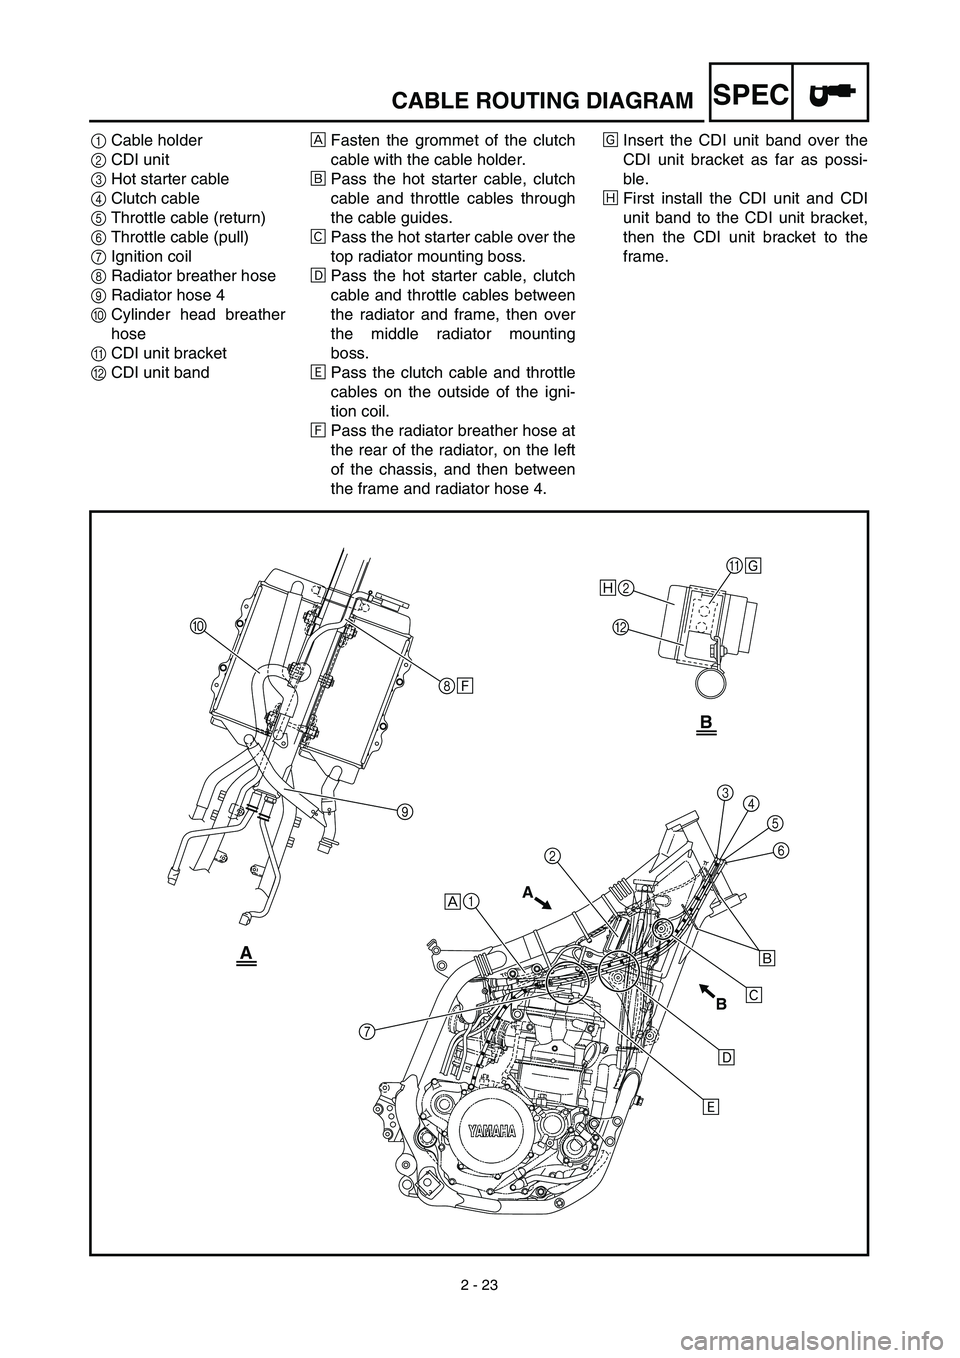 YAMAHA YZ450F 2003  Owners Manual 2 - 23
SPECCABLE ROUTING DIAGRAM
1Cable holder
2CDI unit
3Hot starter cable
4Clutch cable
5Throttle cable (return)
6Throttle cable (pull)
7Ignition coil
8Radiator breather hose
9Radiator hose 4
0Cylin